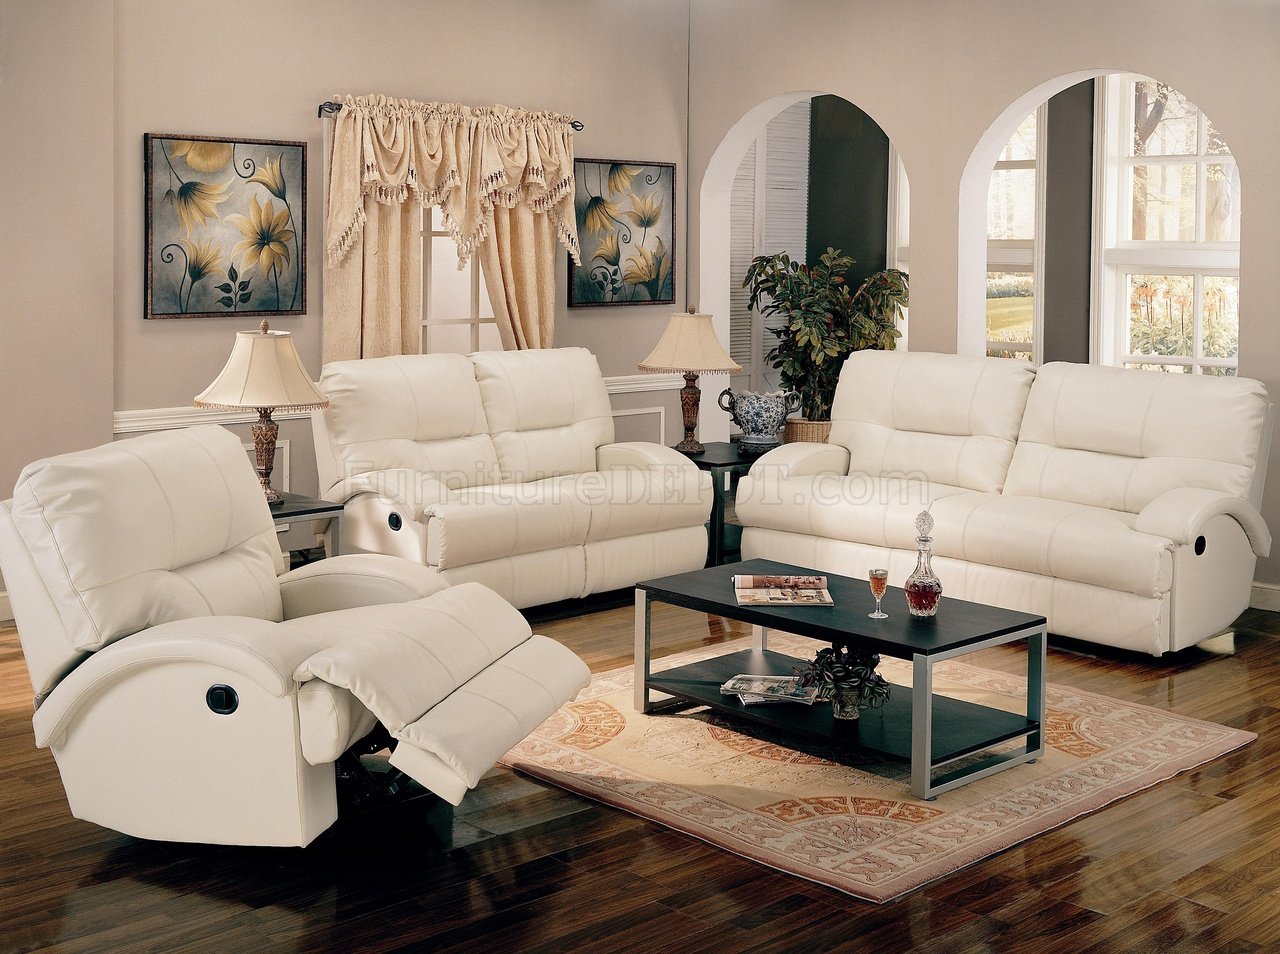 living room with white leather sofa